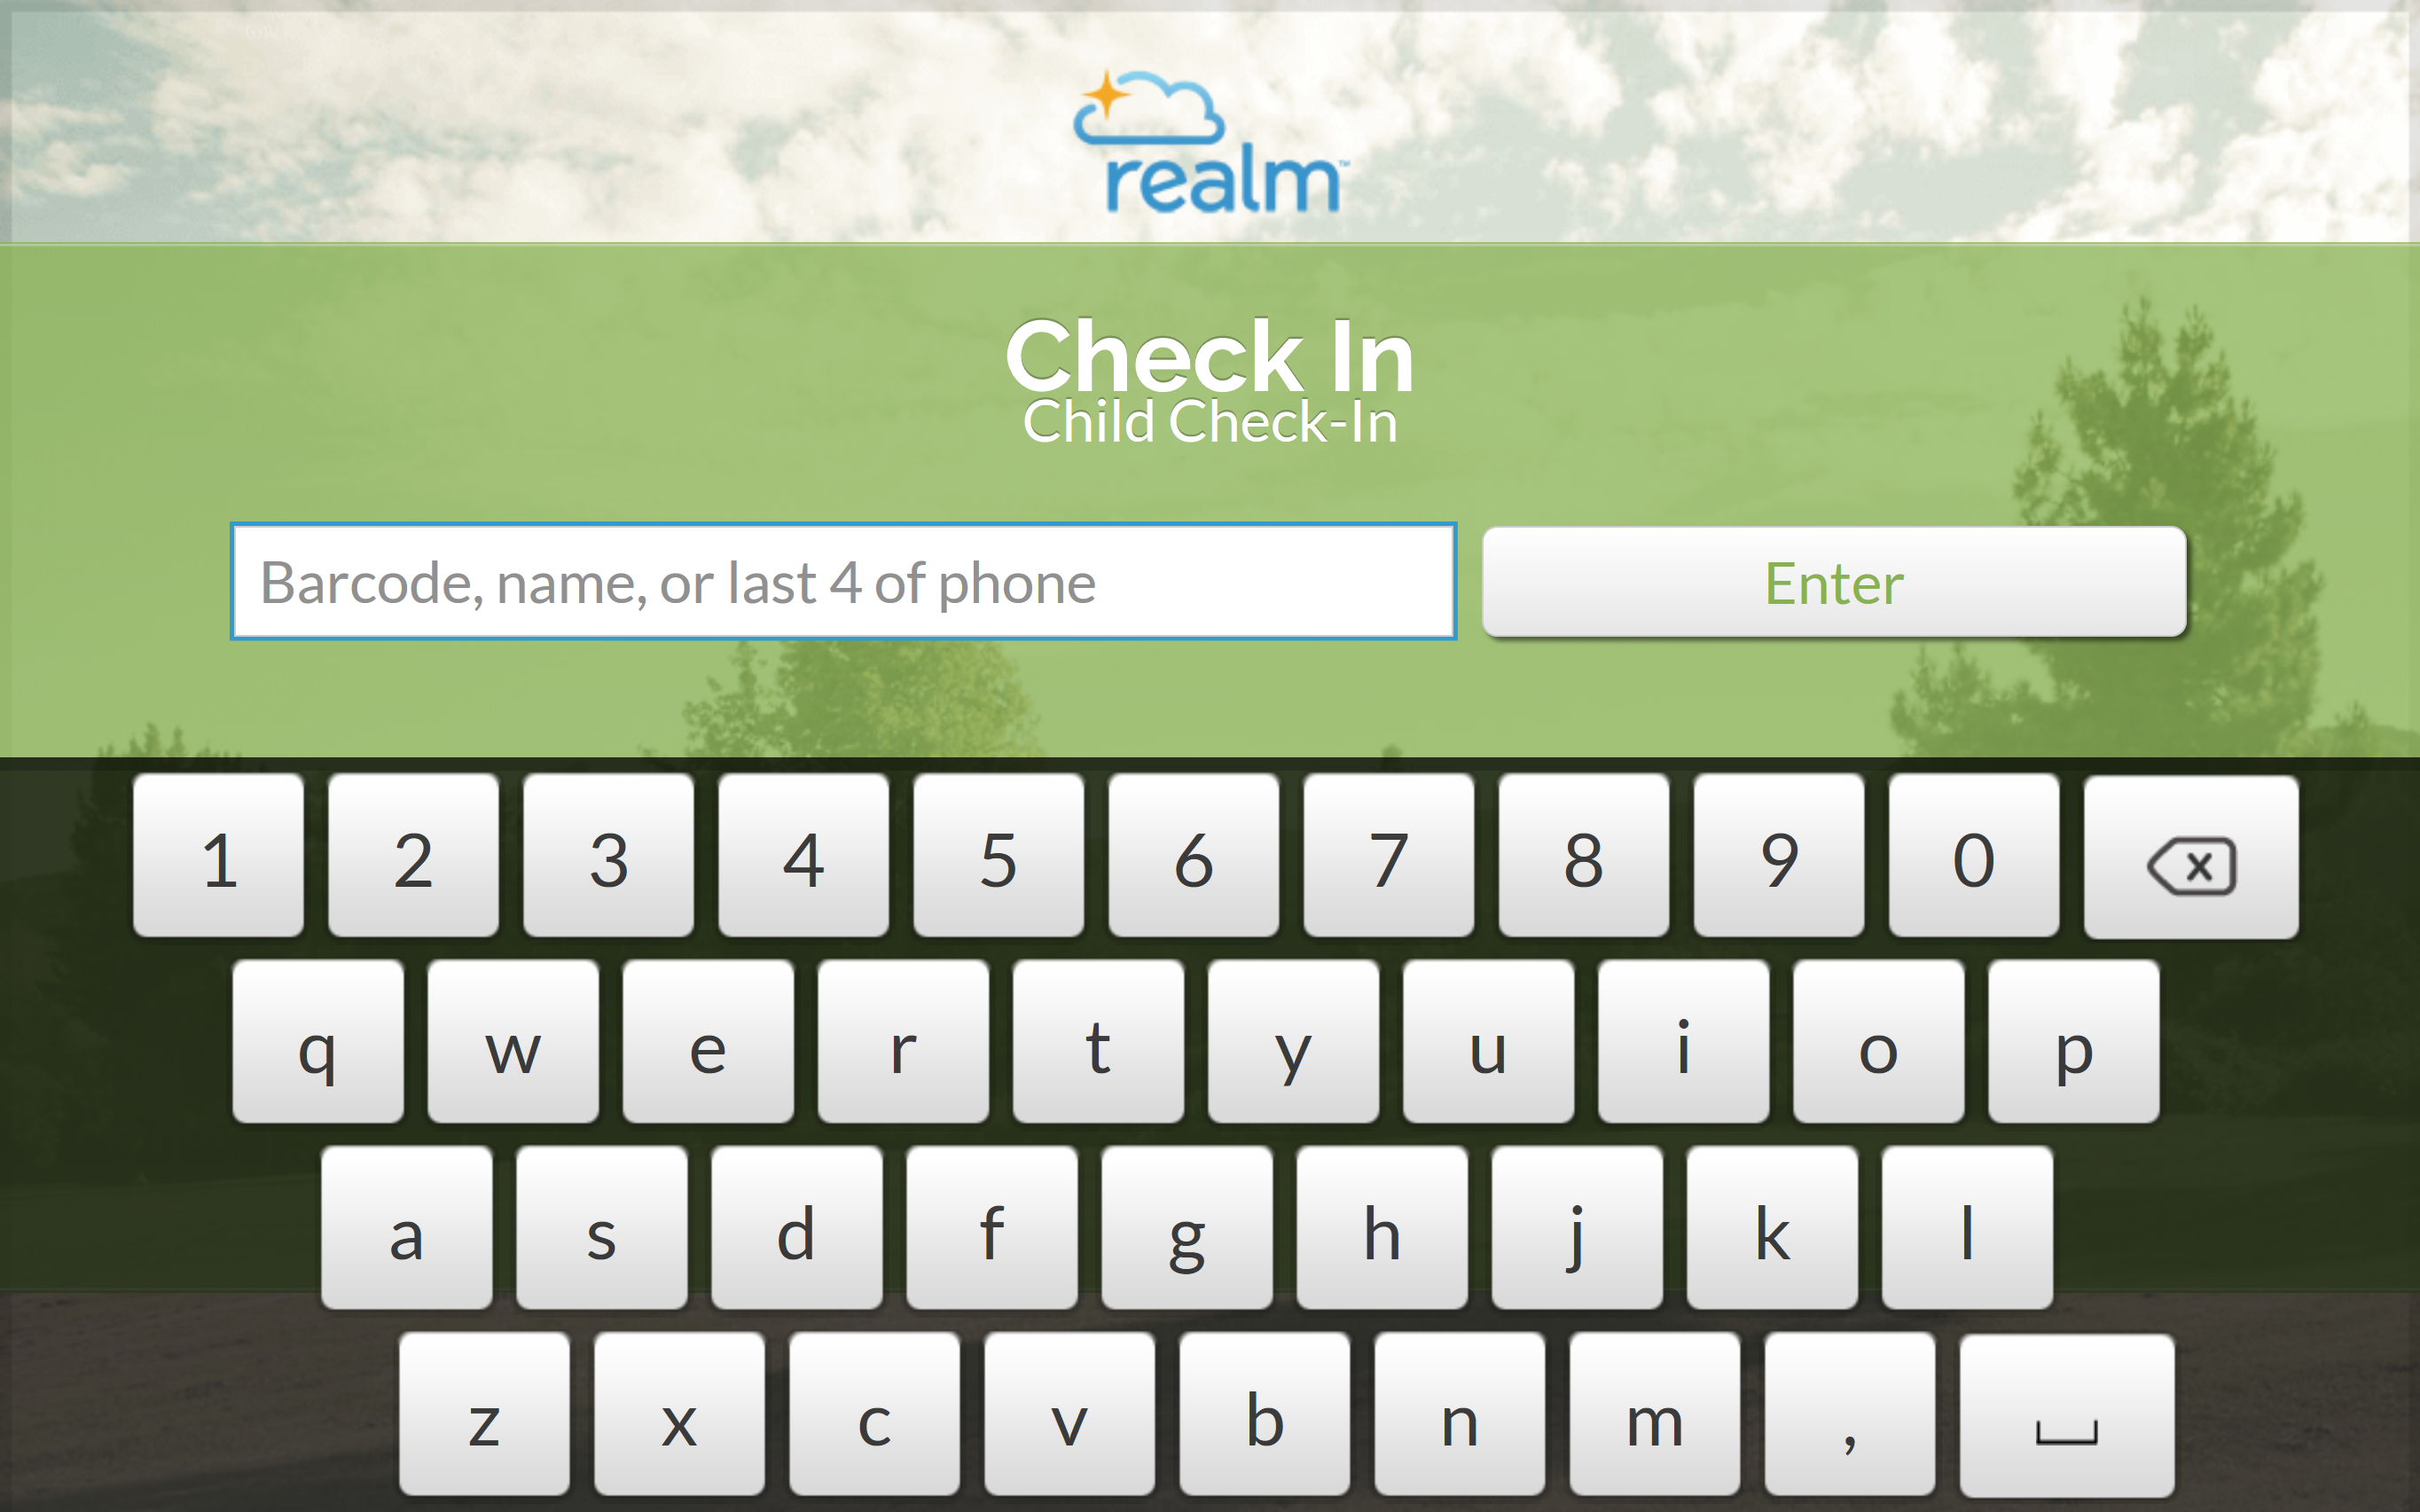 Check-in screen with onscreen keyboard